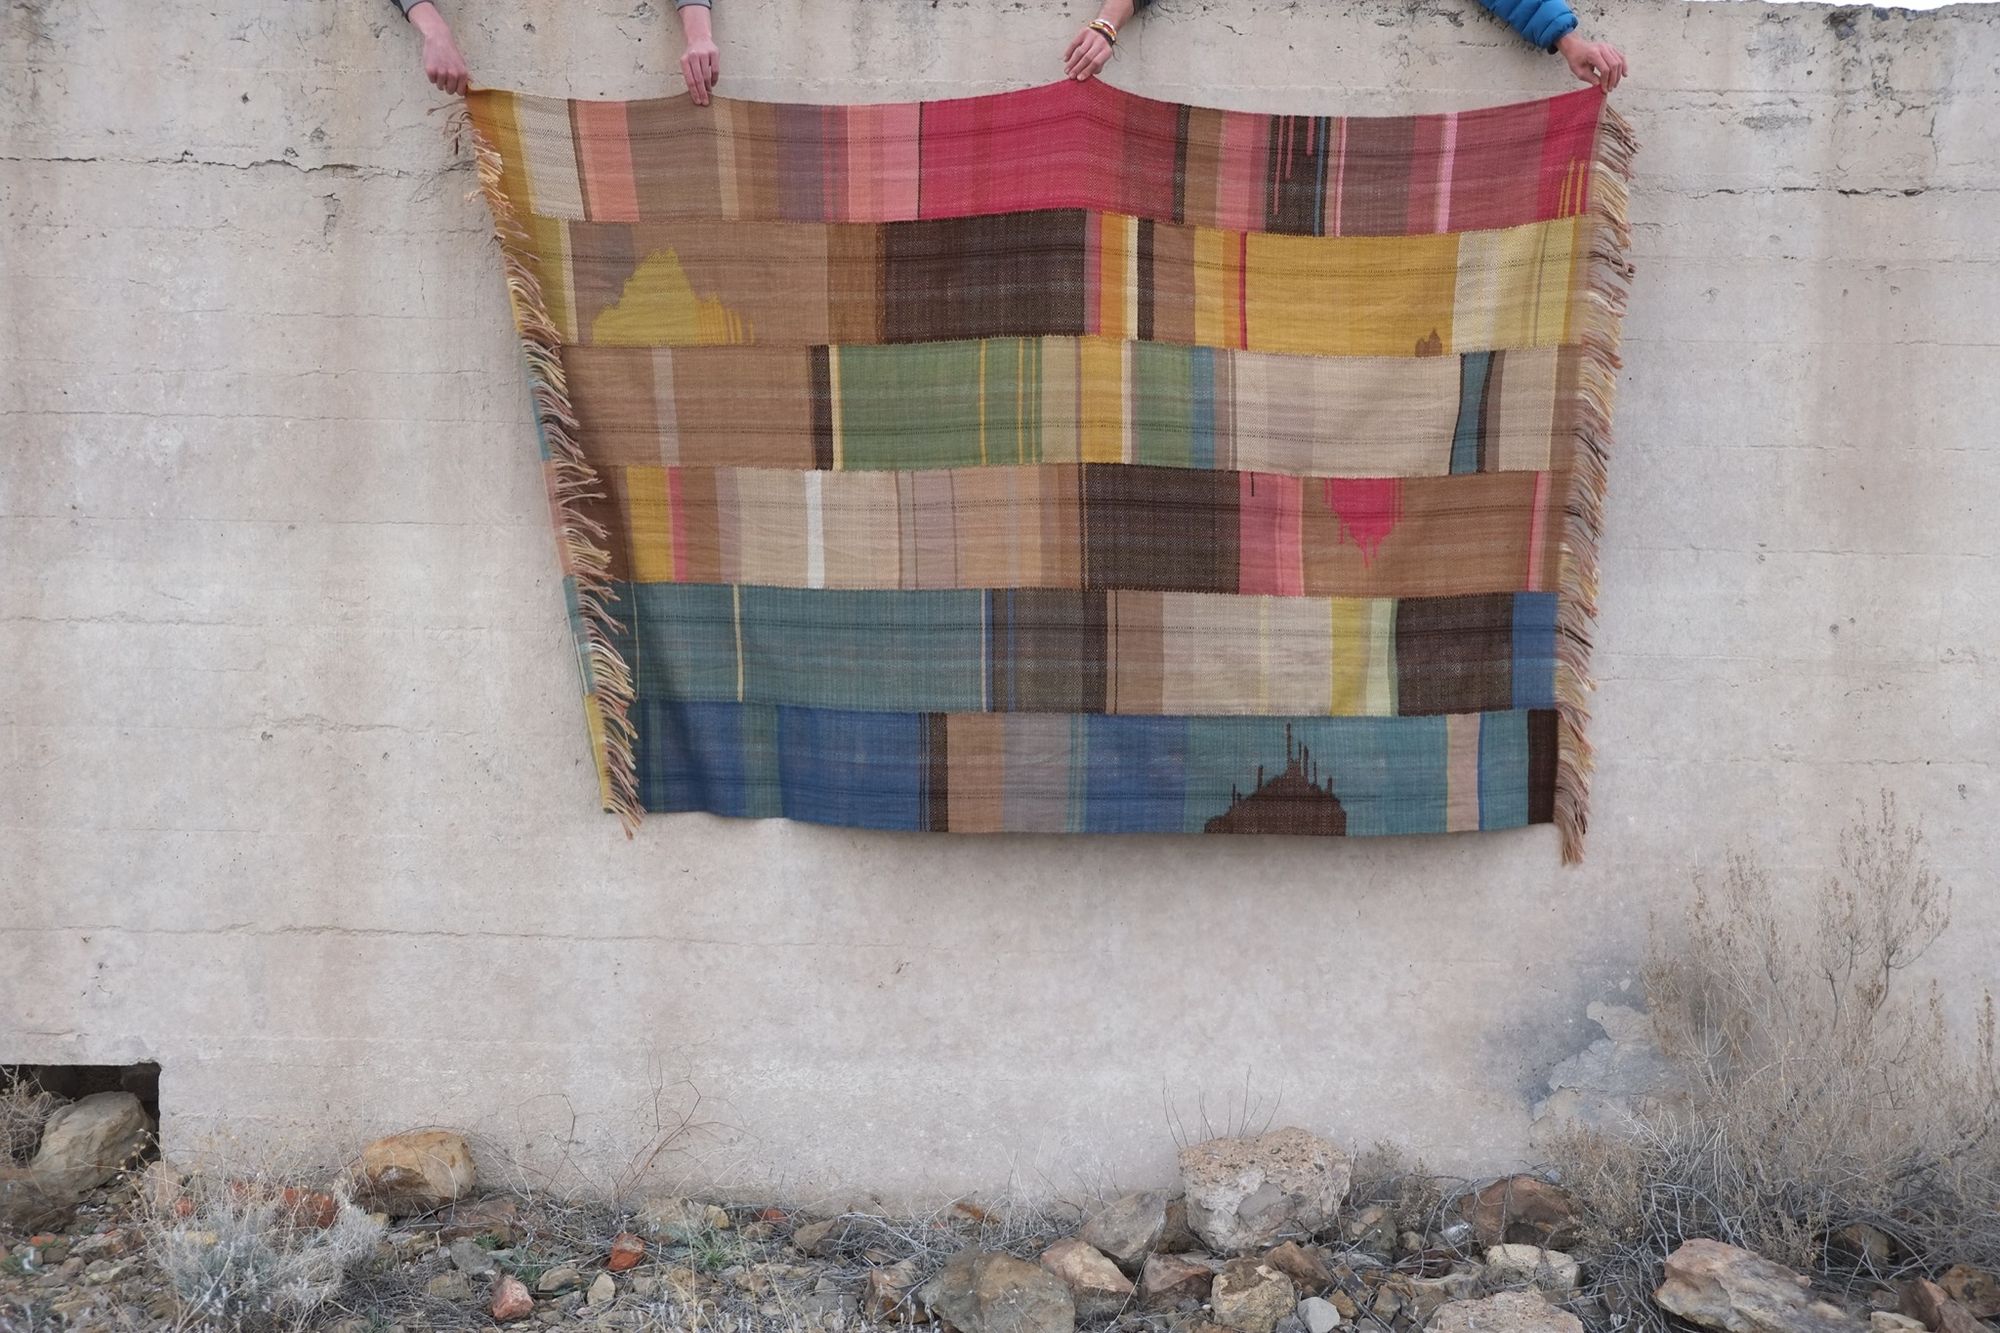 A multicolored woolen blanket being held by four hands agains a white concrete wall.